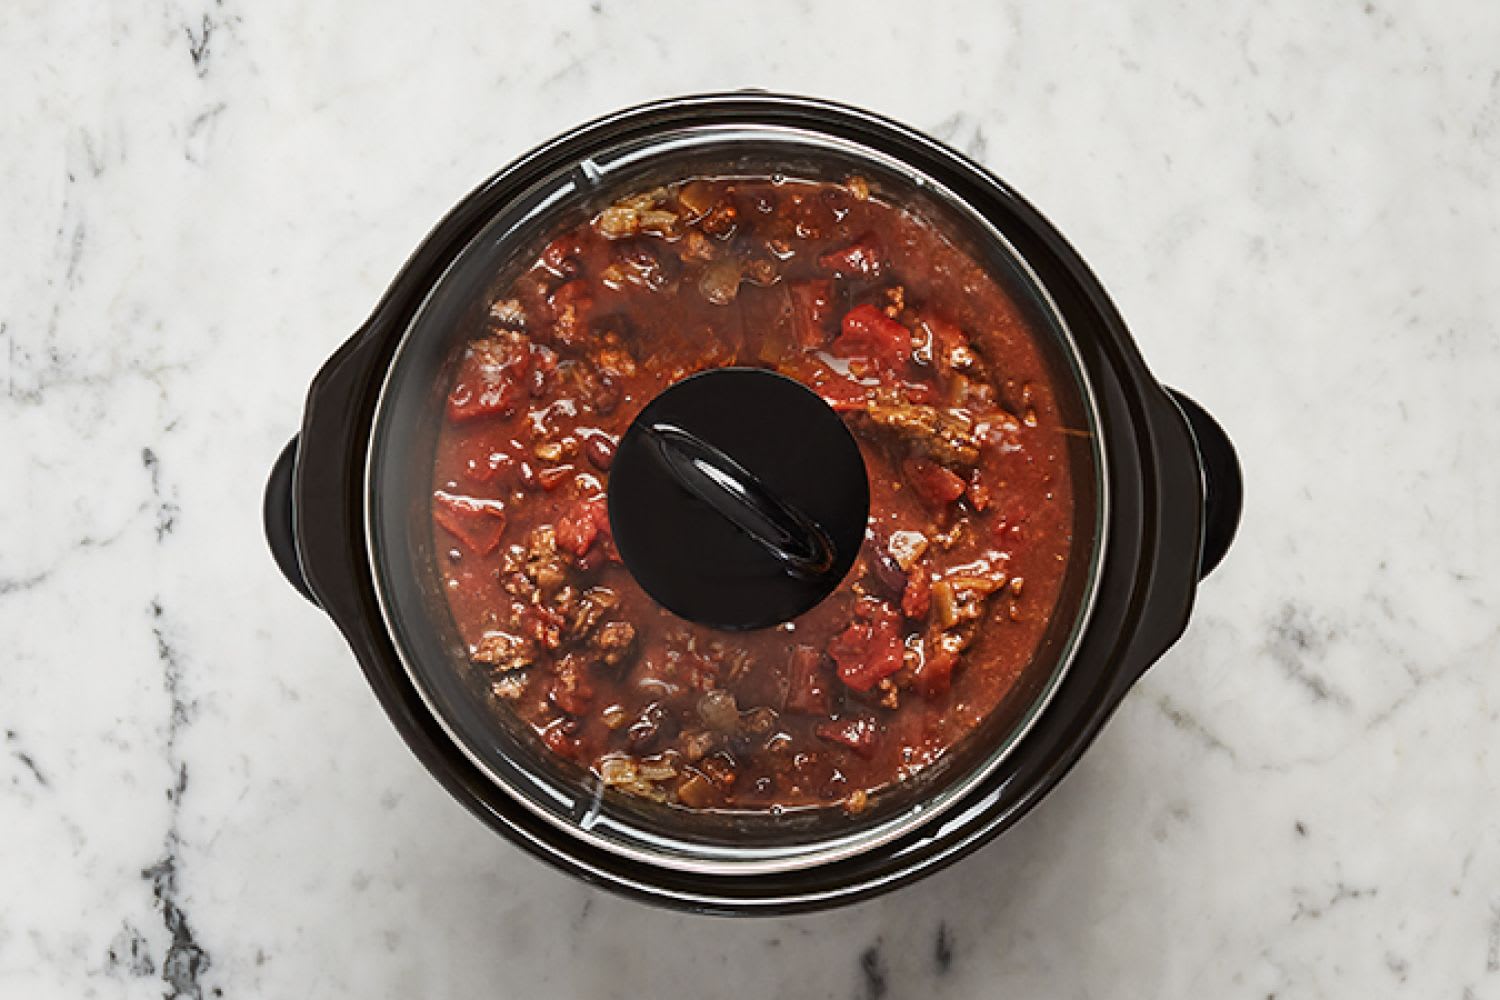 Can You Make Chili in a Slow Cooker or Crockpot?